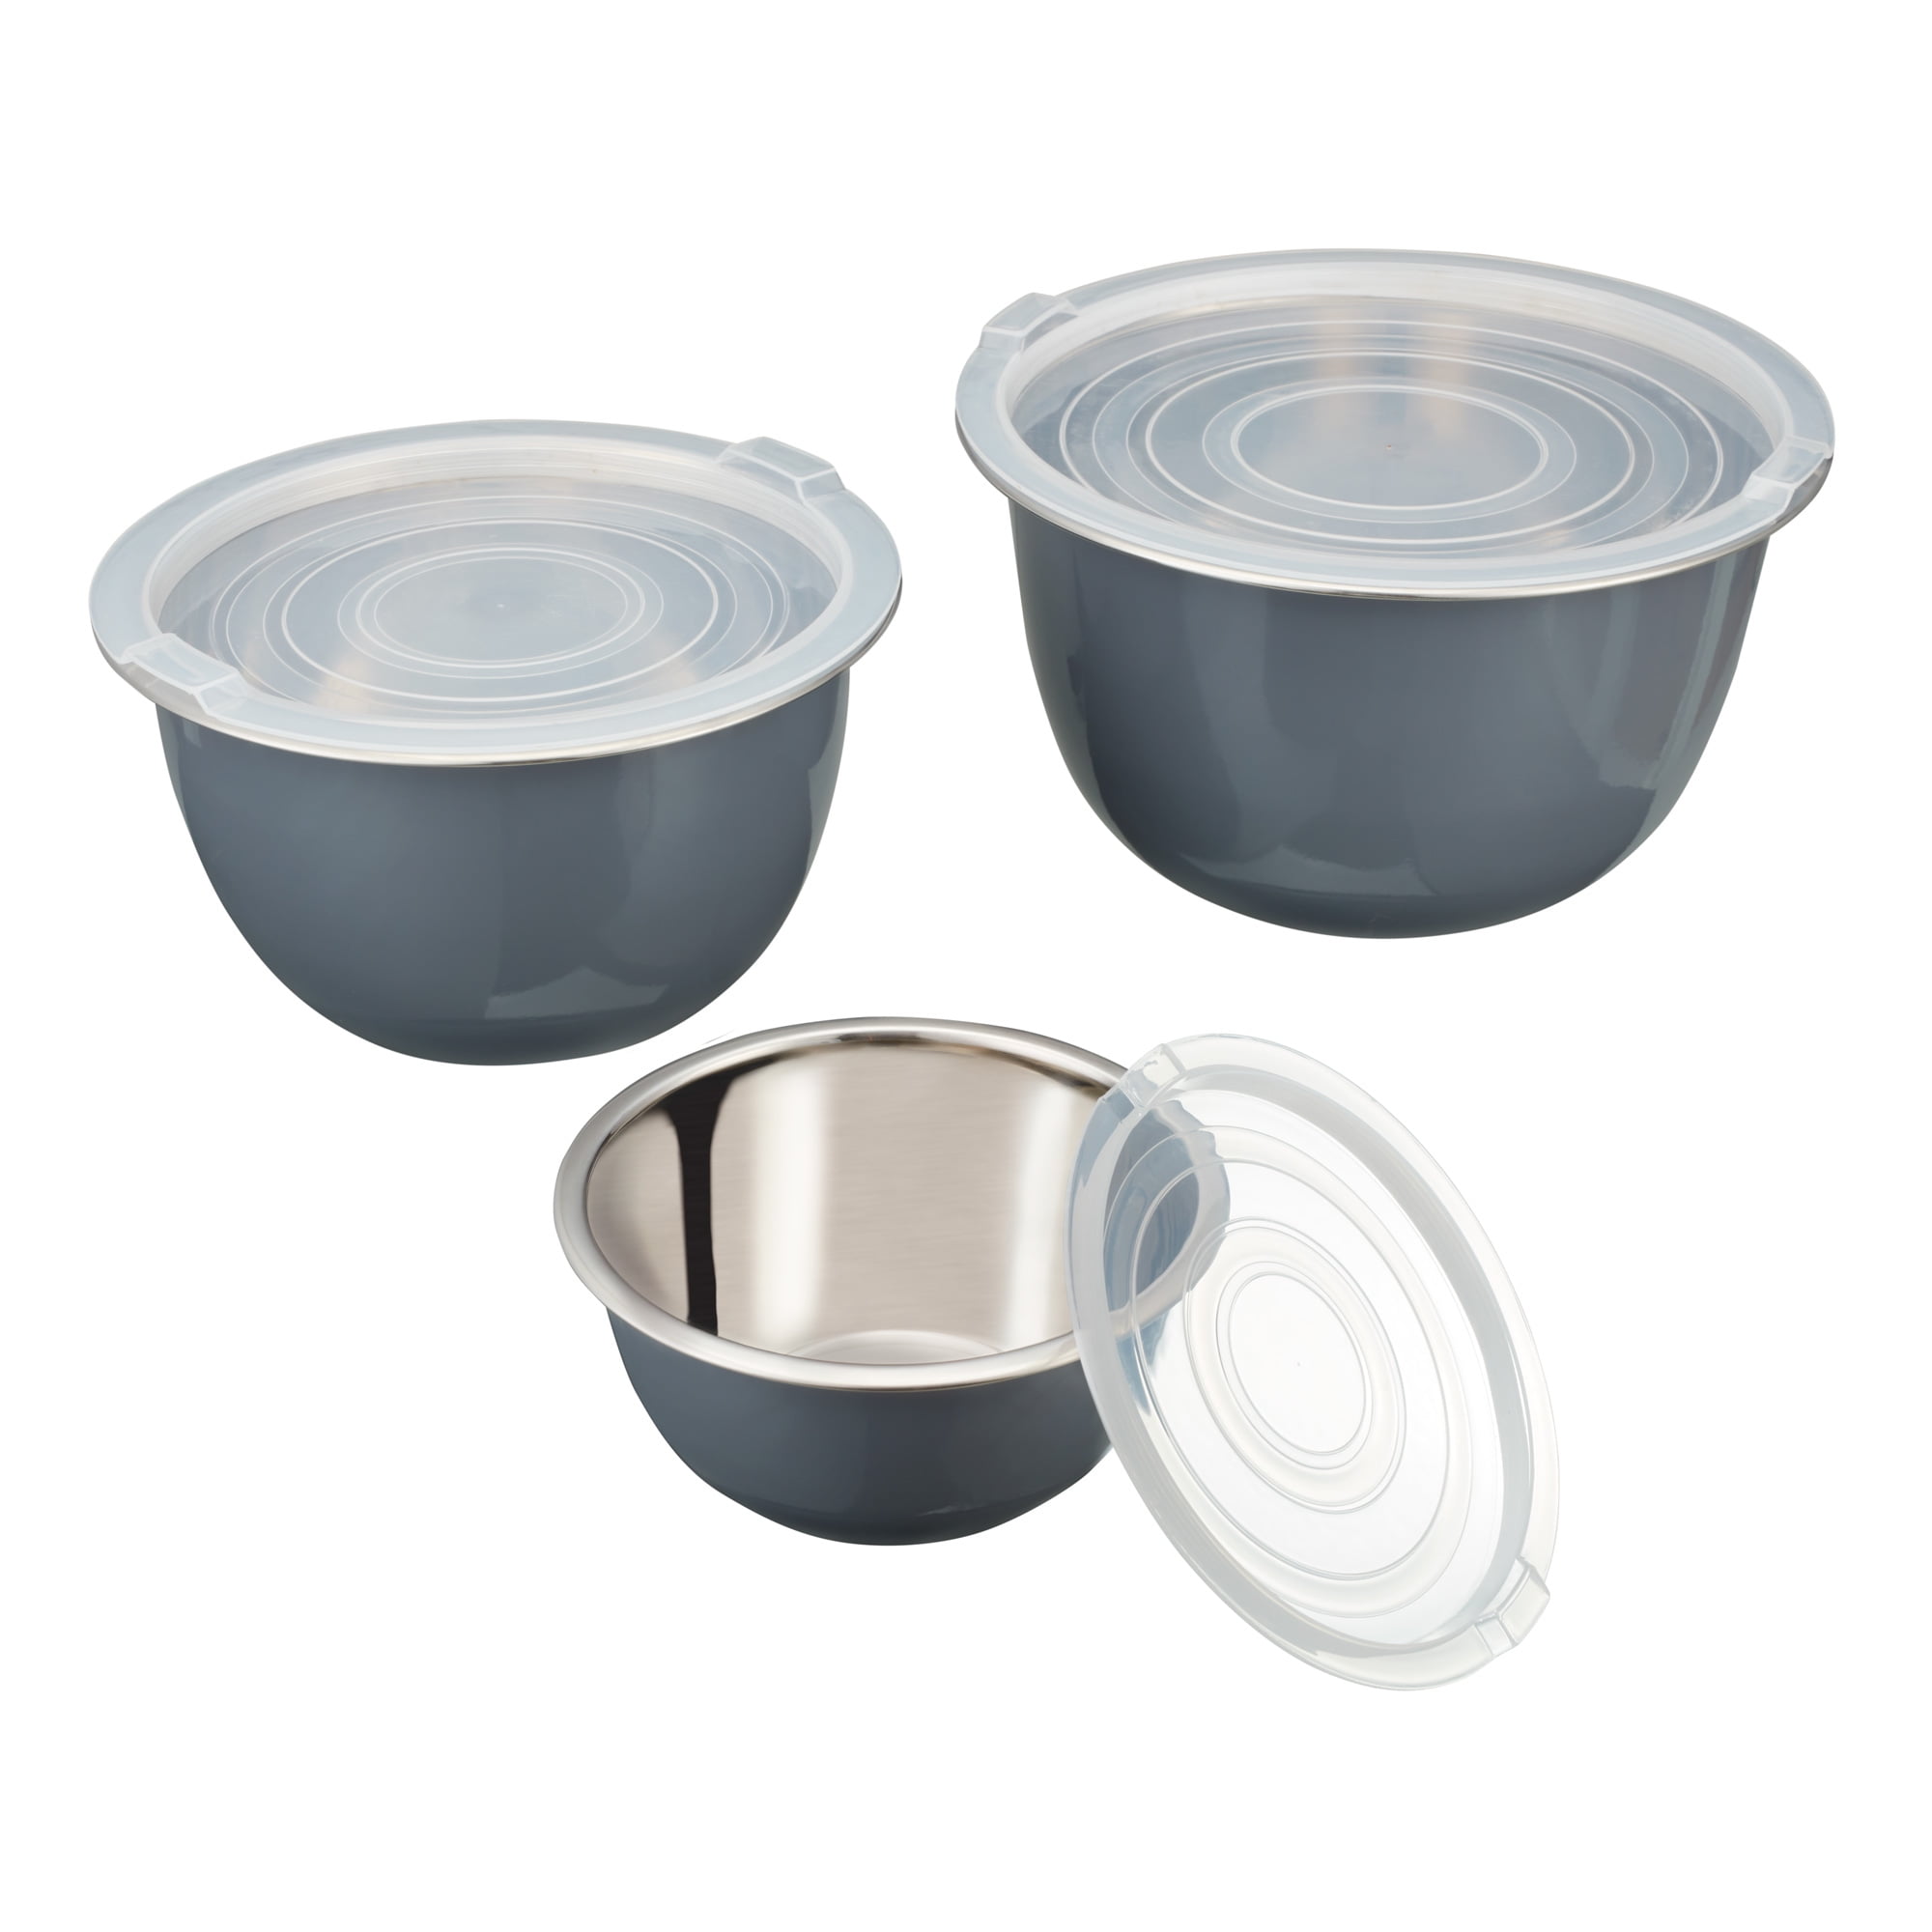 stainless steel mixing bowls with lids set